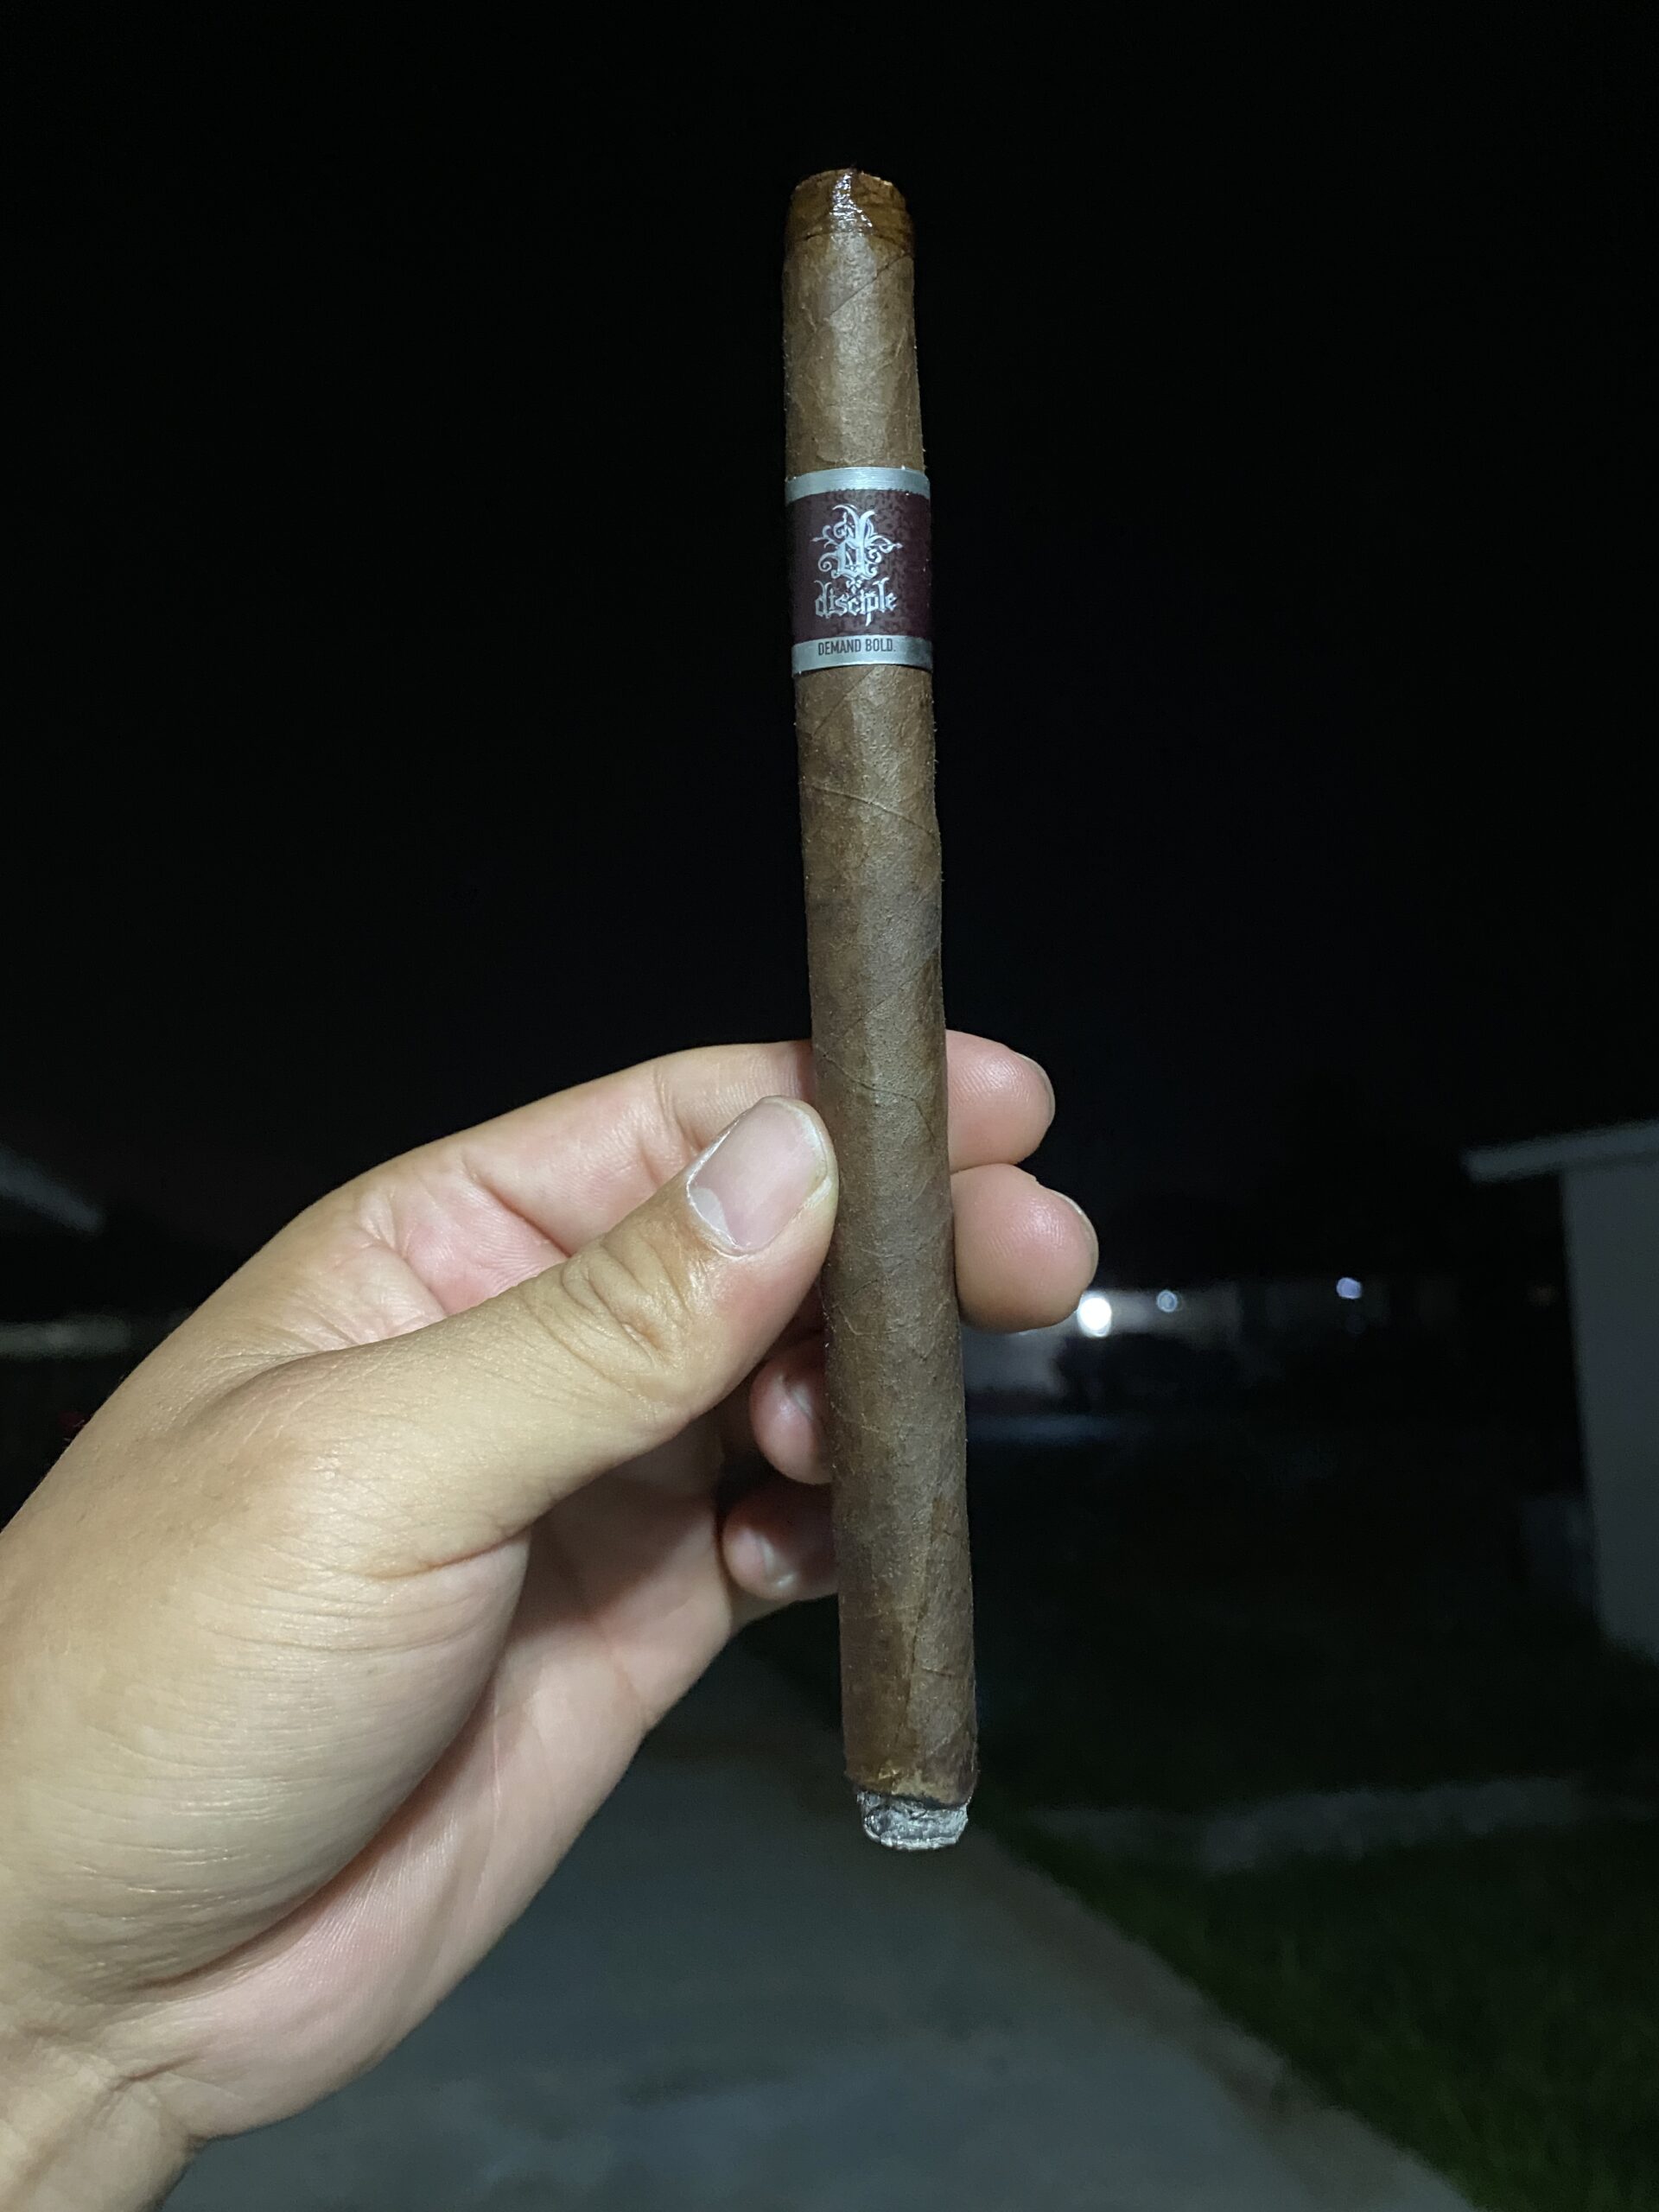 Diesel Disciple Lancero Review: Bold and Robust, A True Powerhouse